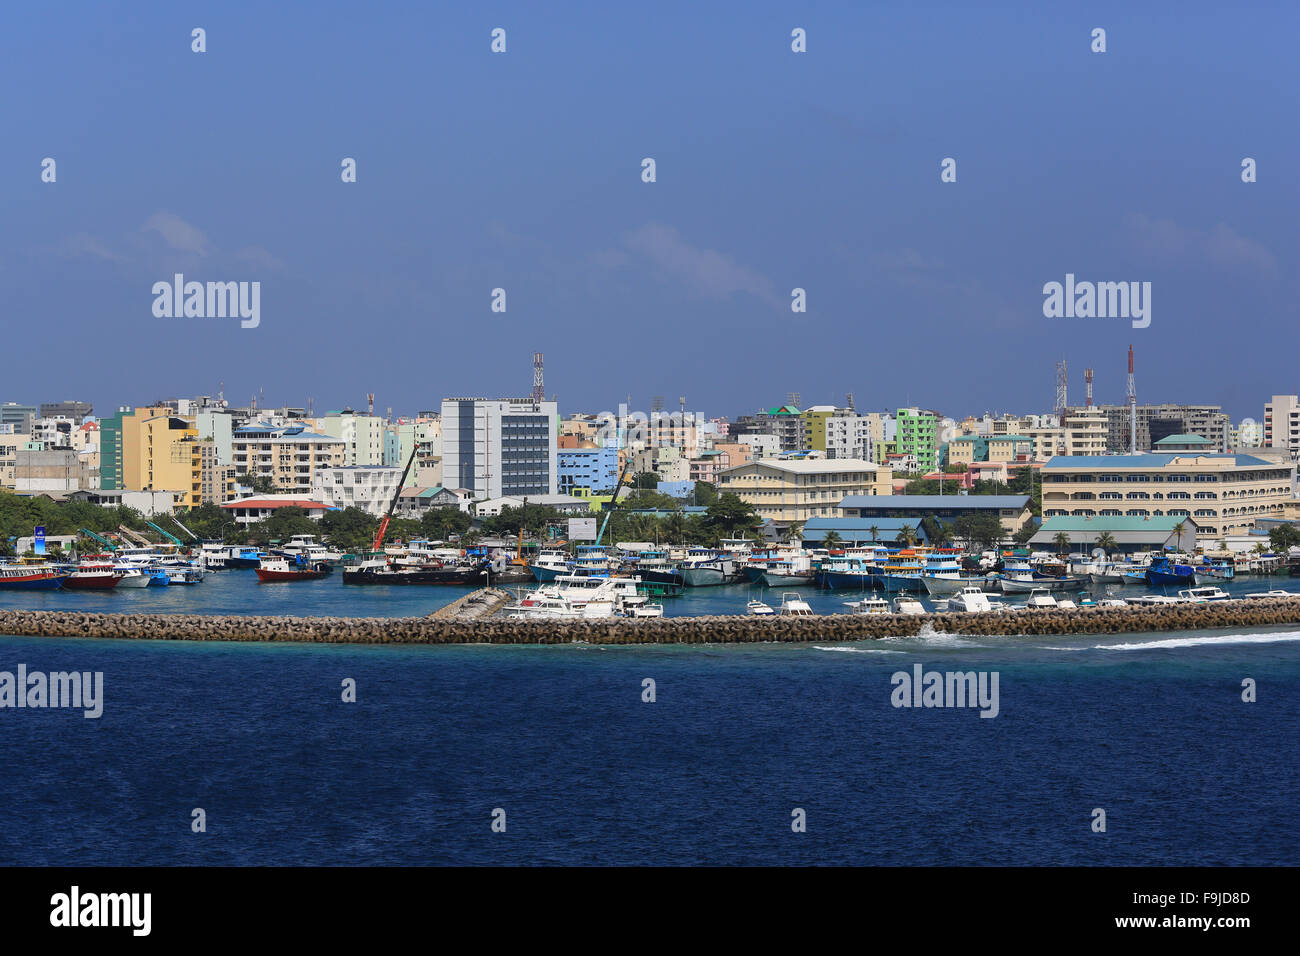 The densely populated island of Male in the Maldives, Indian Ocean, as taken from a passing cruise ship. Stock Photo